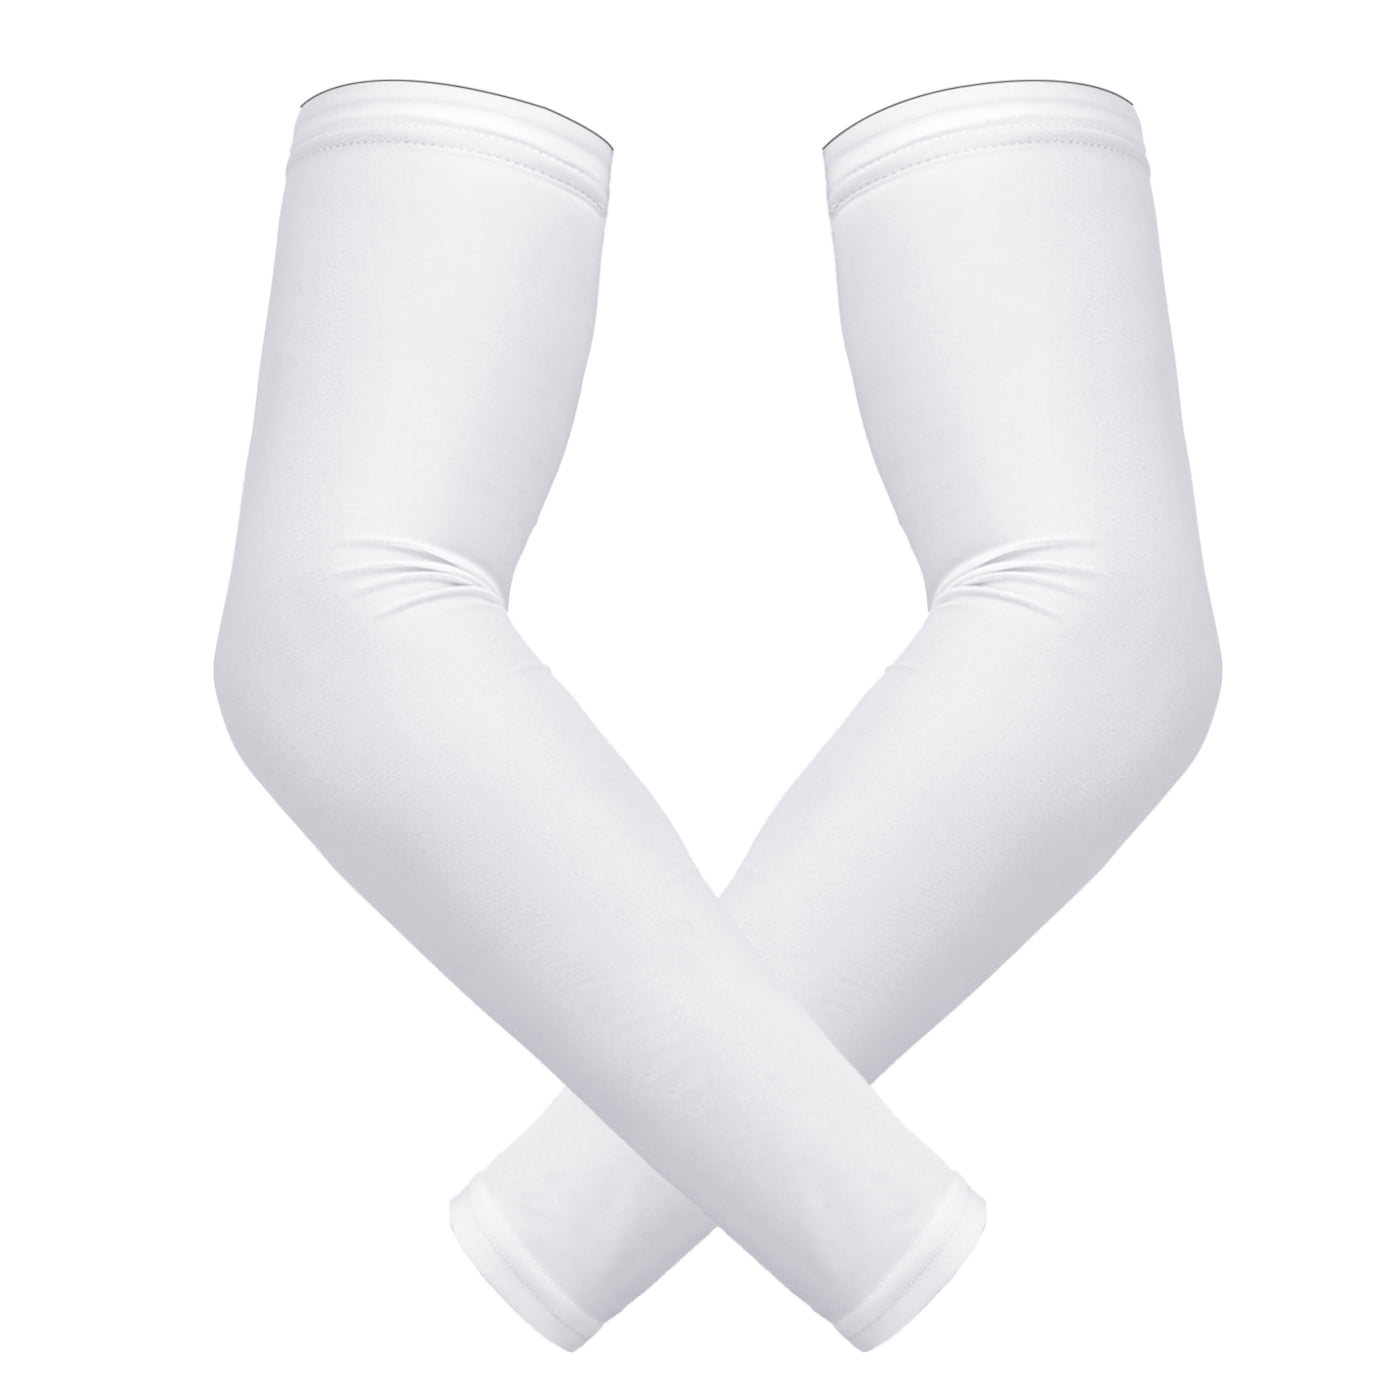 CompressionZ Youth Compression Arm Sleeves - Sports Sleeve For